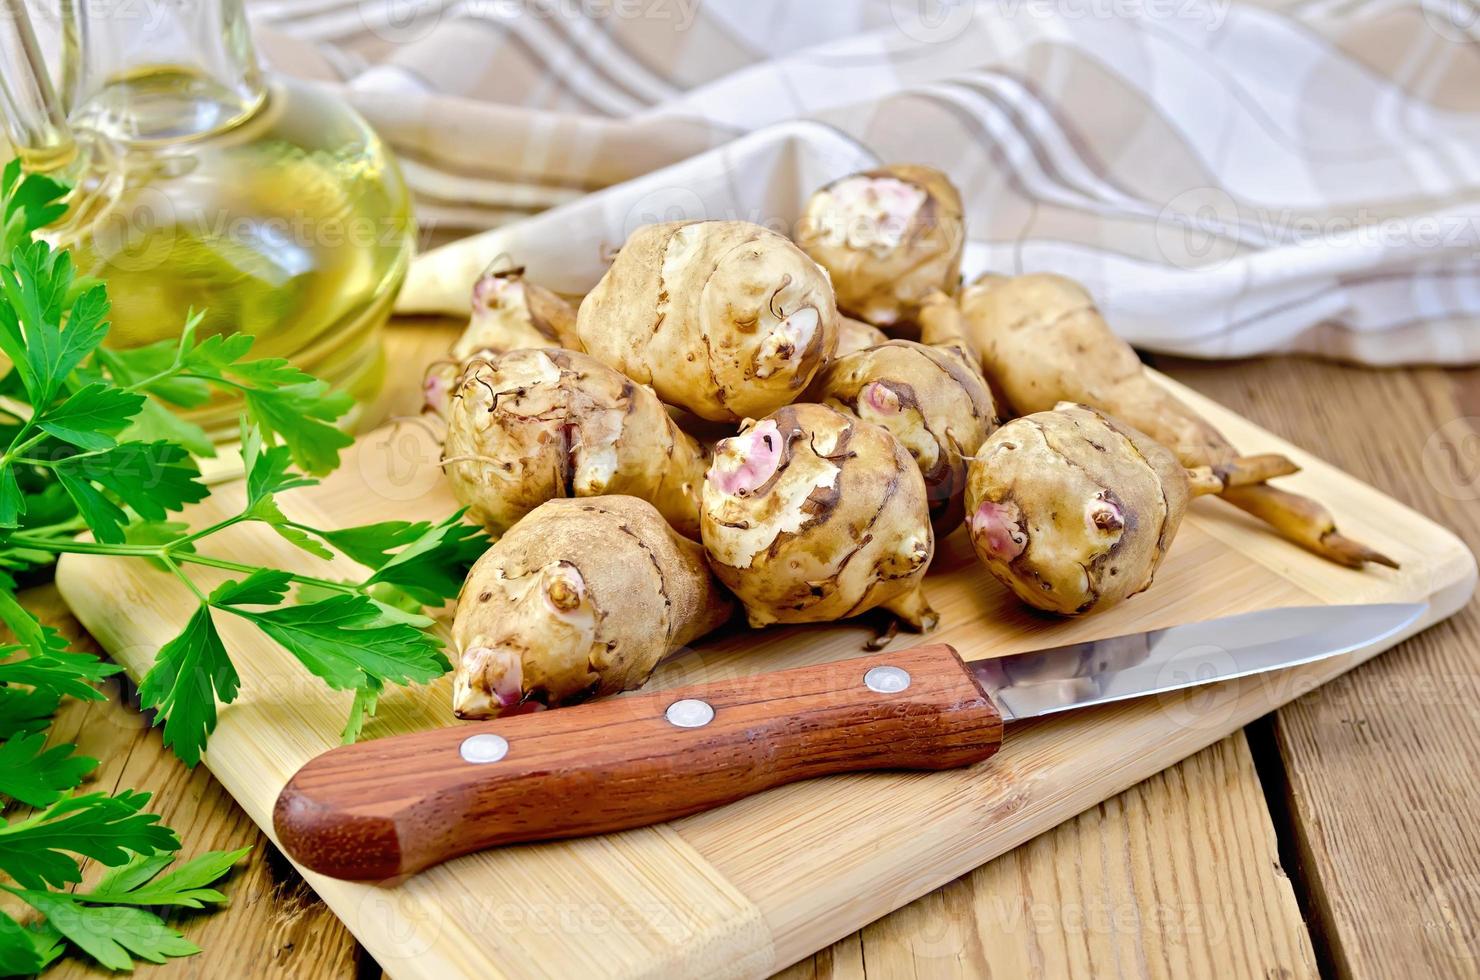 What beneficial and medicinal properties does Jerusalem artichoke have?